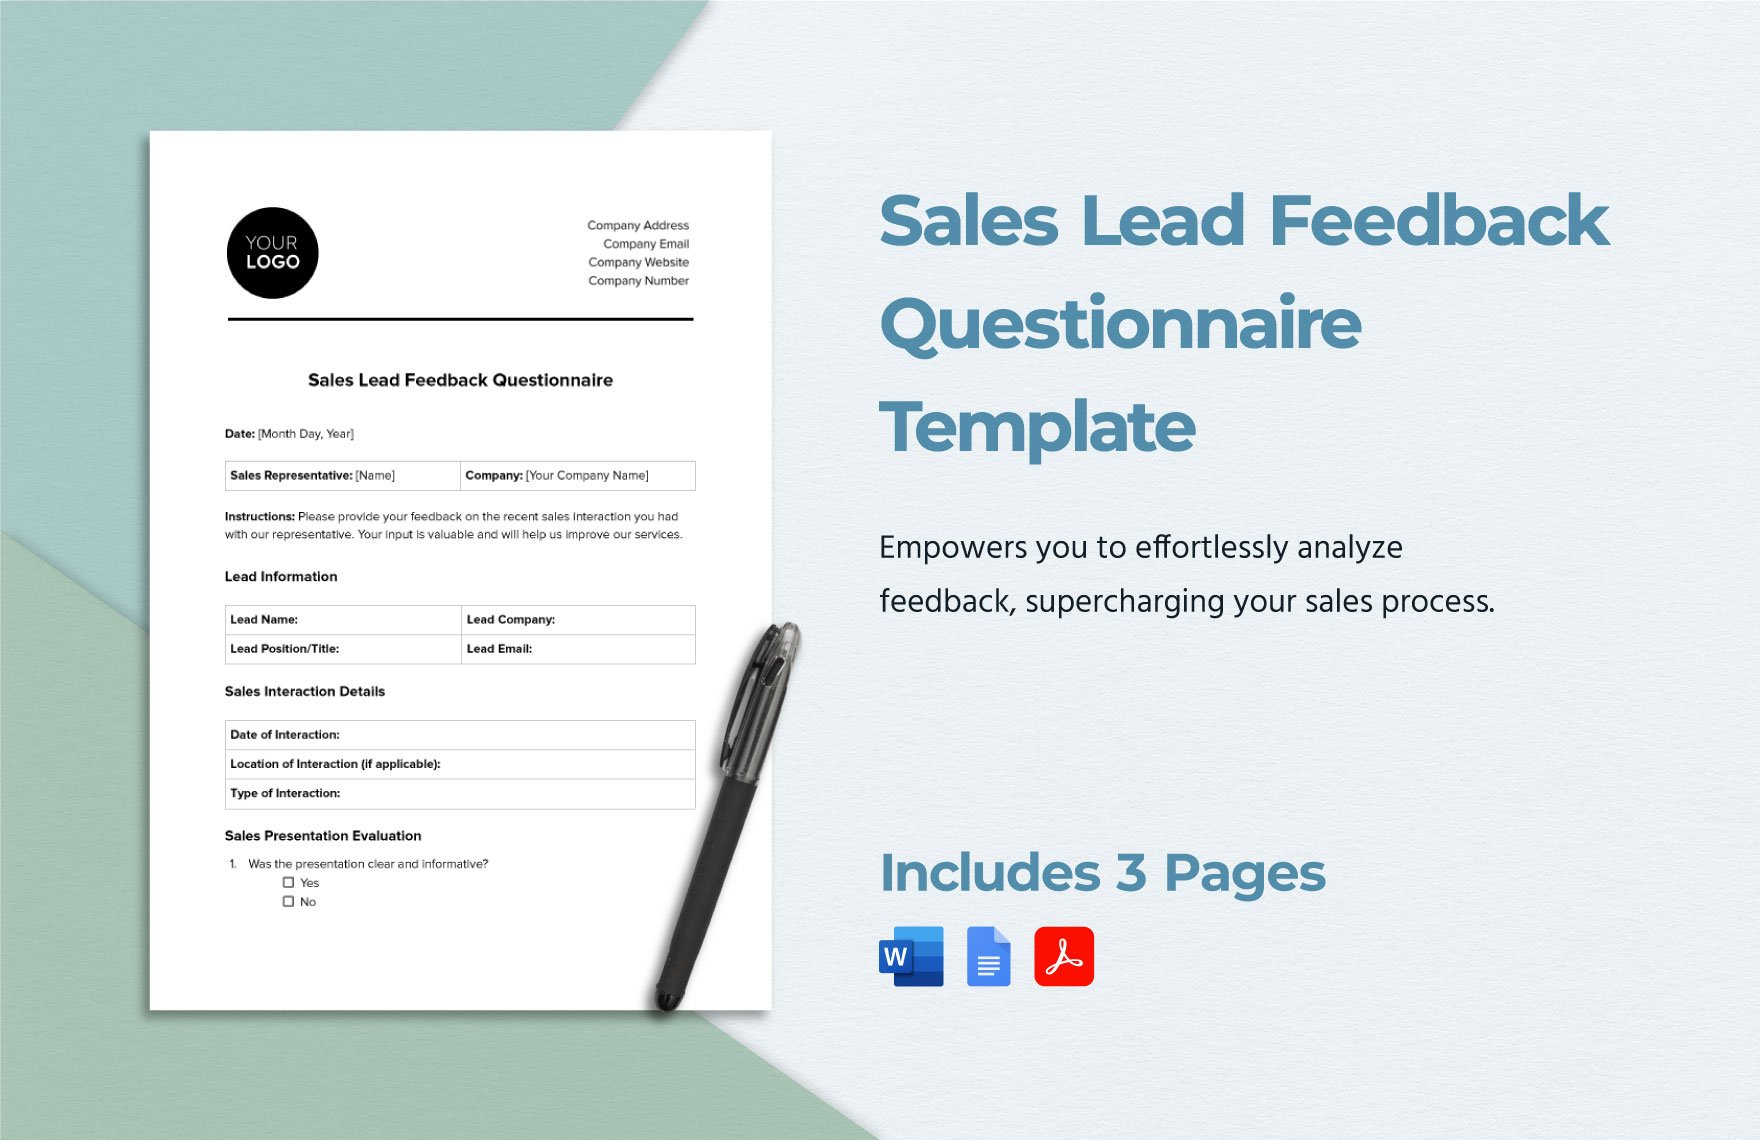 Sales Lead Feedback Questionnaire Template in Word, Google Docs, PDF